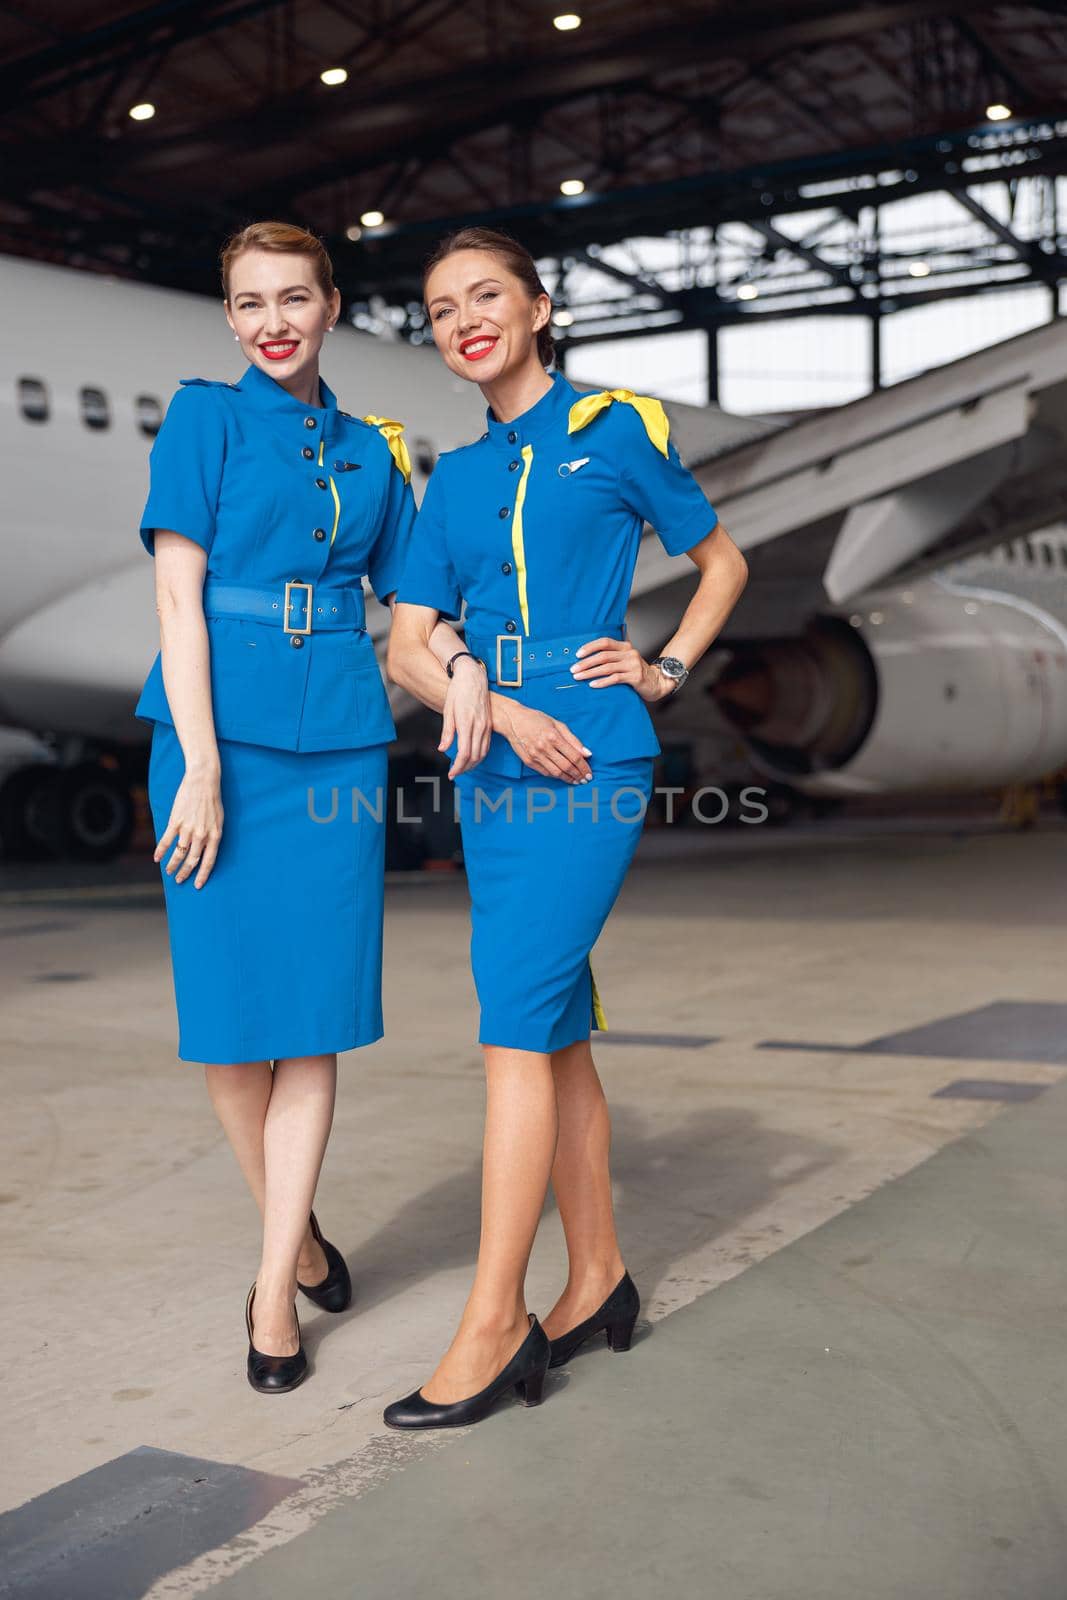 Full length shot of two air stewardesses in stylish blue uniform smiling at camera, standing together in front of passenger aircraft in hangar at the airport. Occupation concept